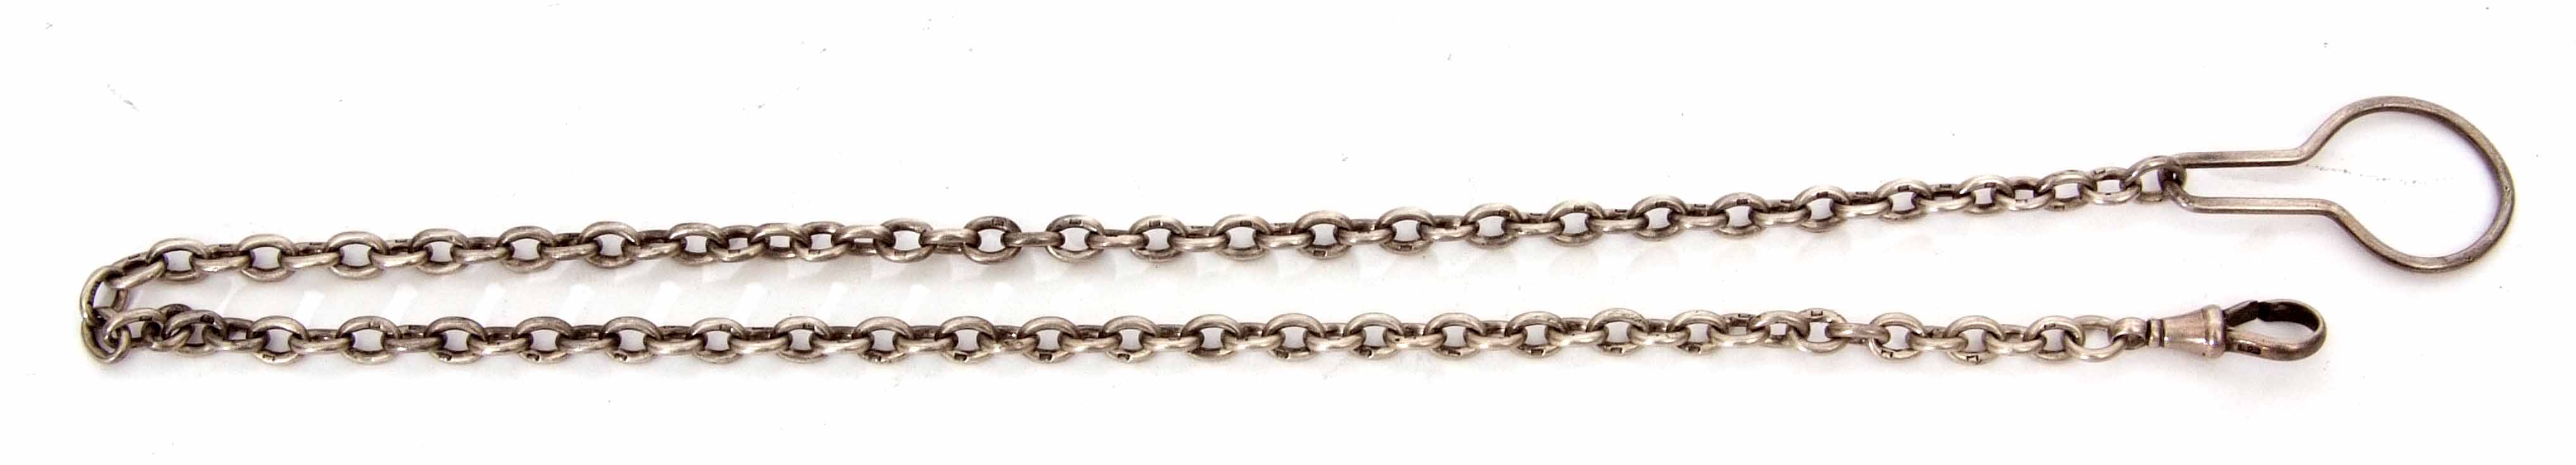 Late 19th century silver brick link watch chain set with single swivel and button holder, length